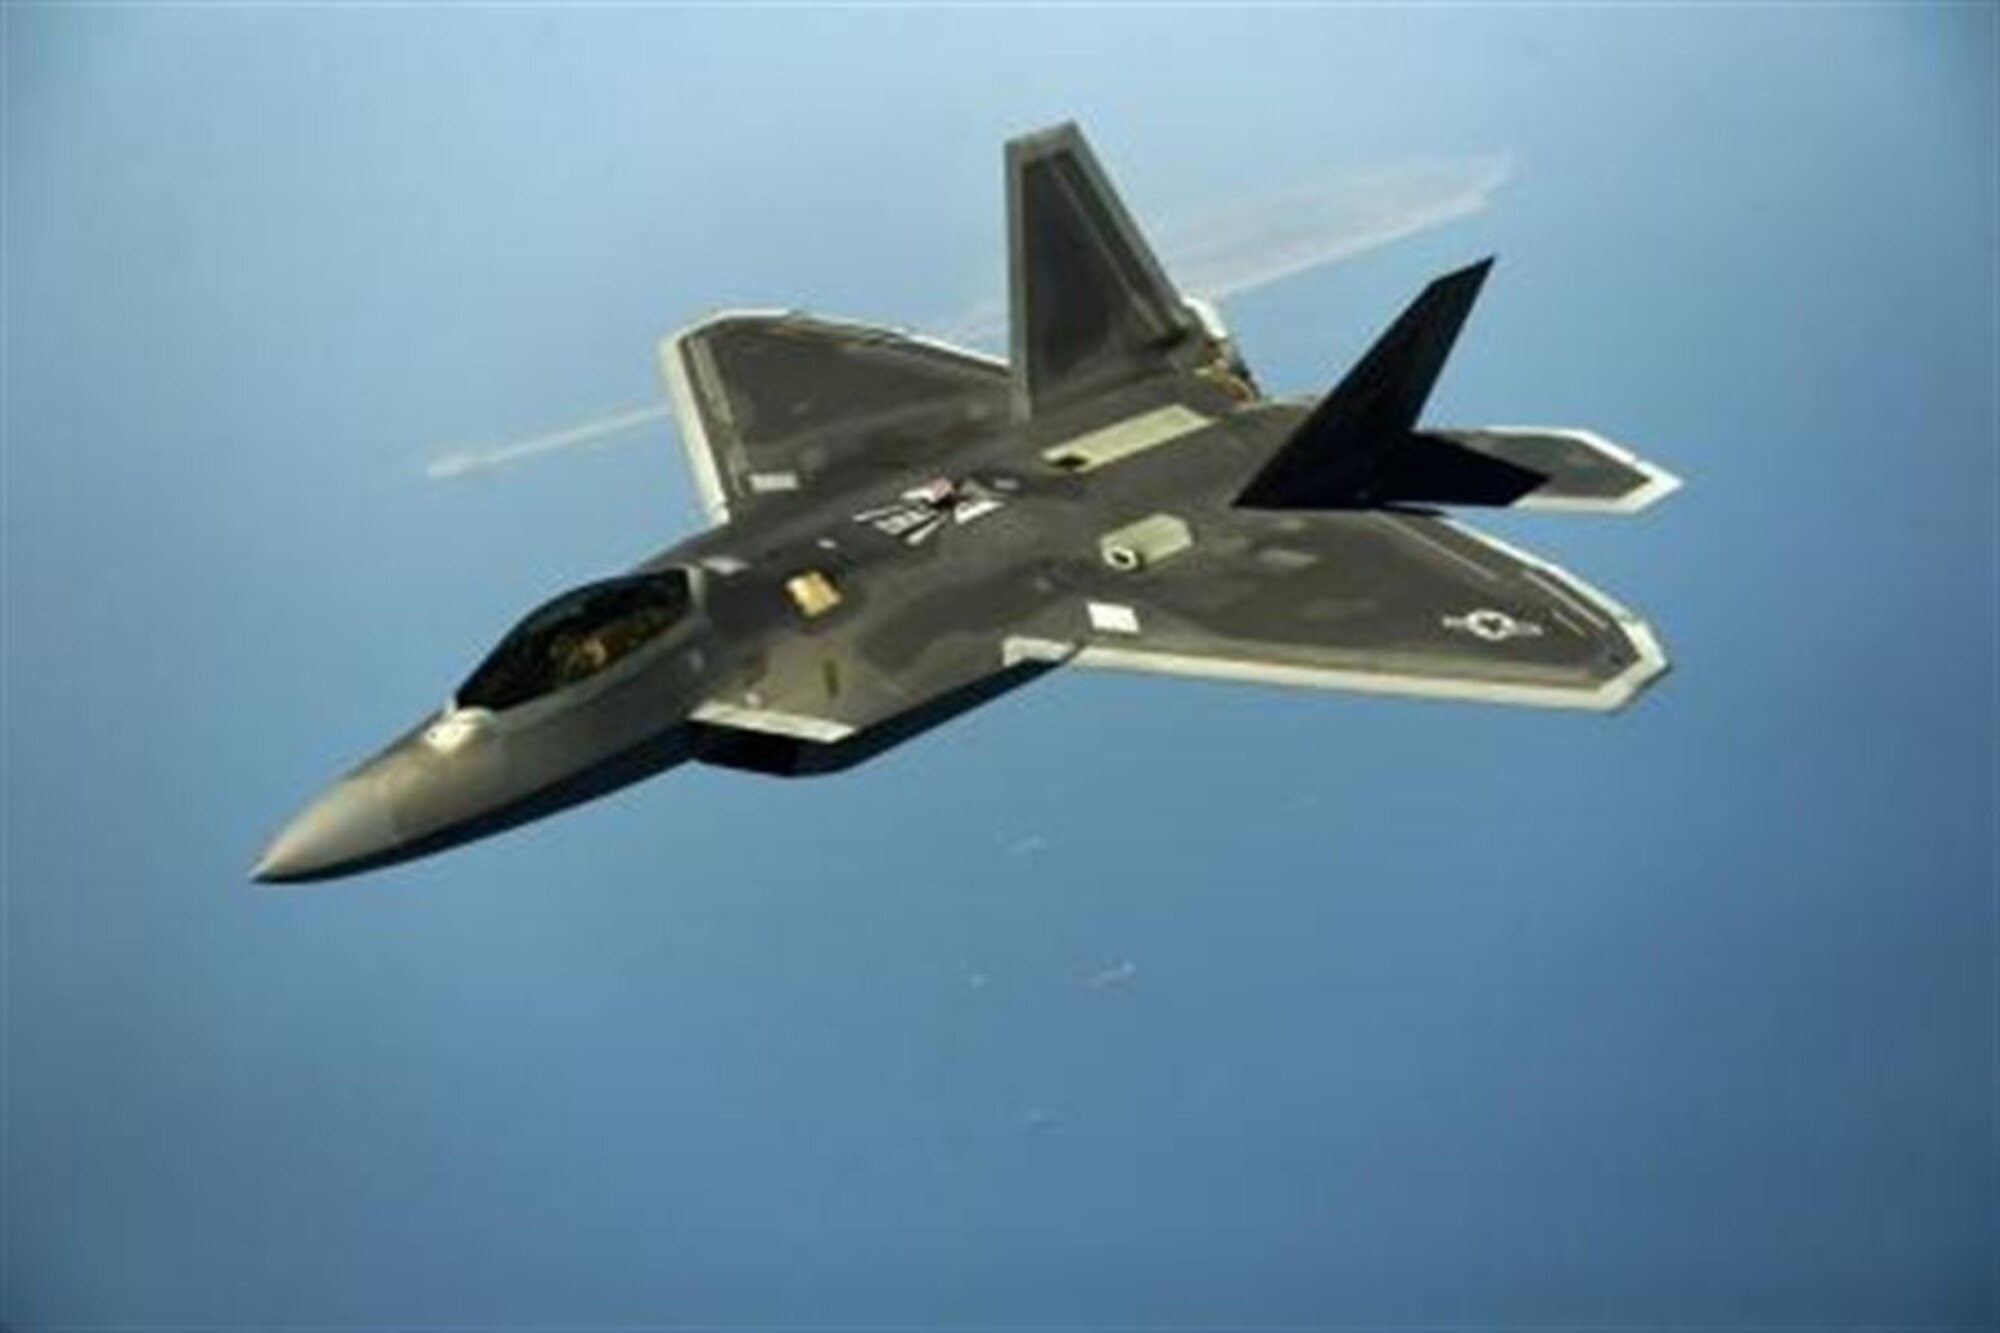 A U.S. Air Force F-22 maneuvers after being in-air refueled April 25, 2014, over the U.S. Central Command Area of responsibility by a KC-135 Stratotanker and aircrew from the 340th Expeditionary Air Refueling Squadron, Al Udeid Air Base, Qatar. The F-22 Raptor is an advanced capability aircraft that can be provided to the Combined Forces Air Component Commander within the region to enhance missions supporting stability and security. (U.S. Air Force photo by Staff Sgt. Vernon Young Jr.)